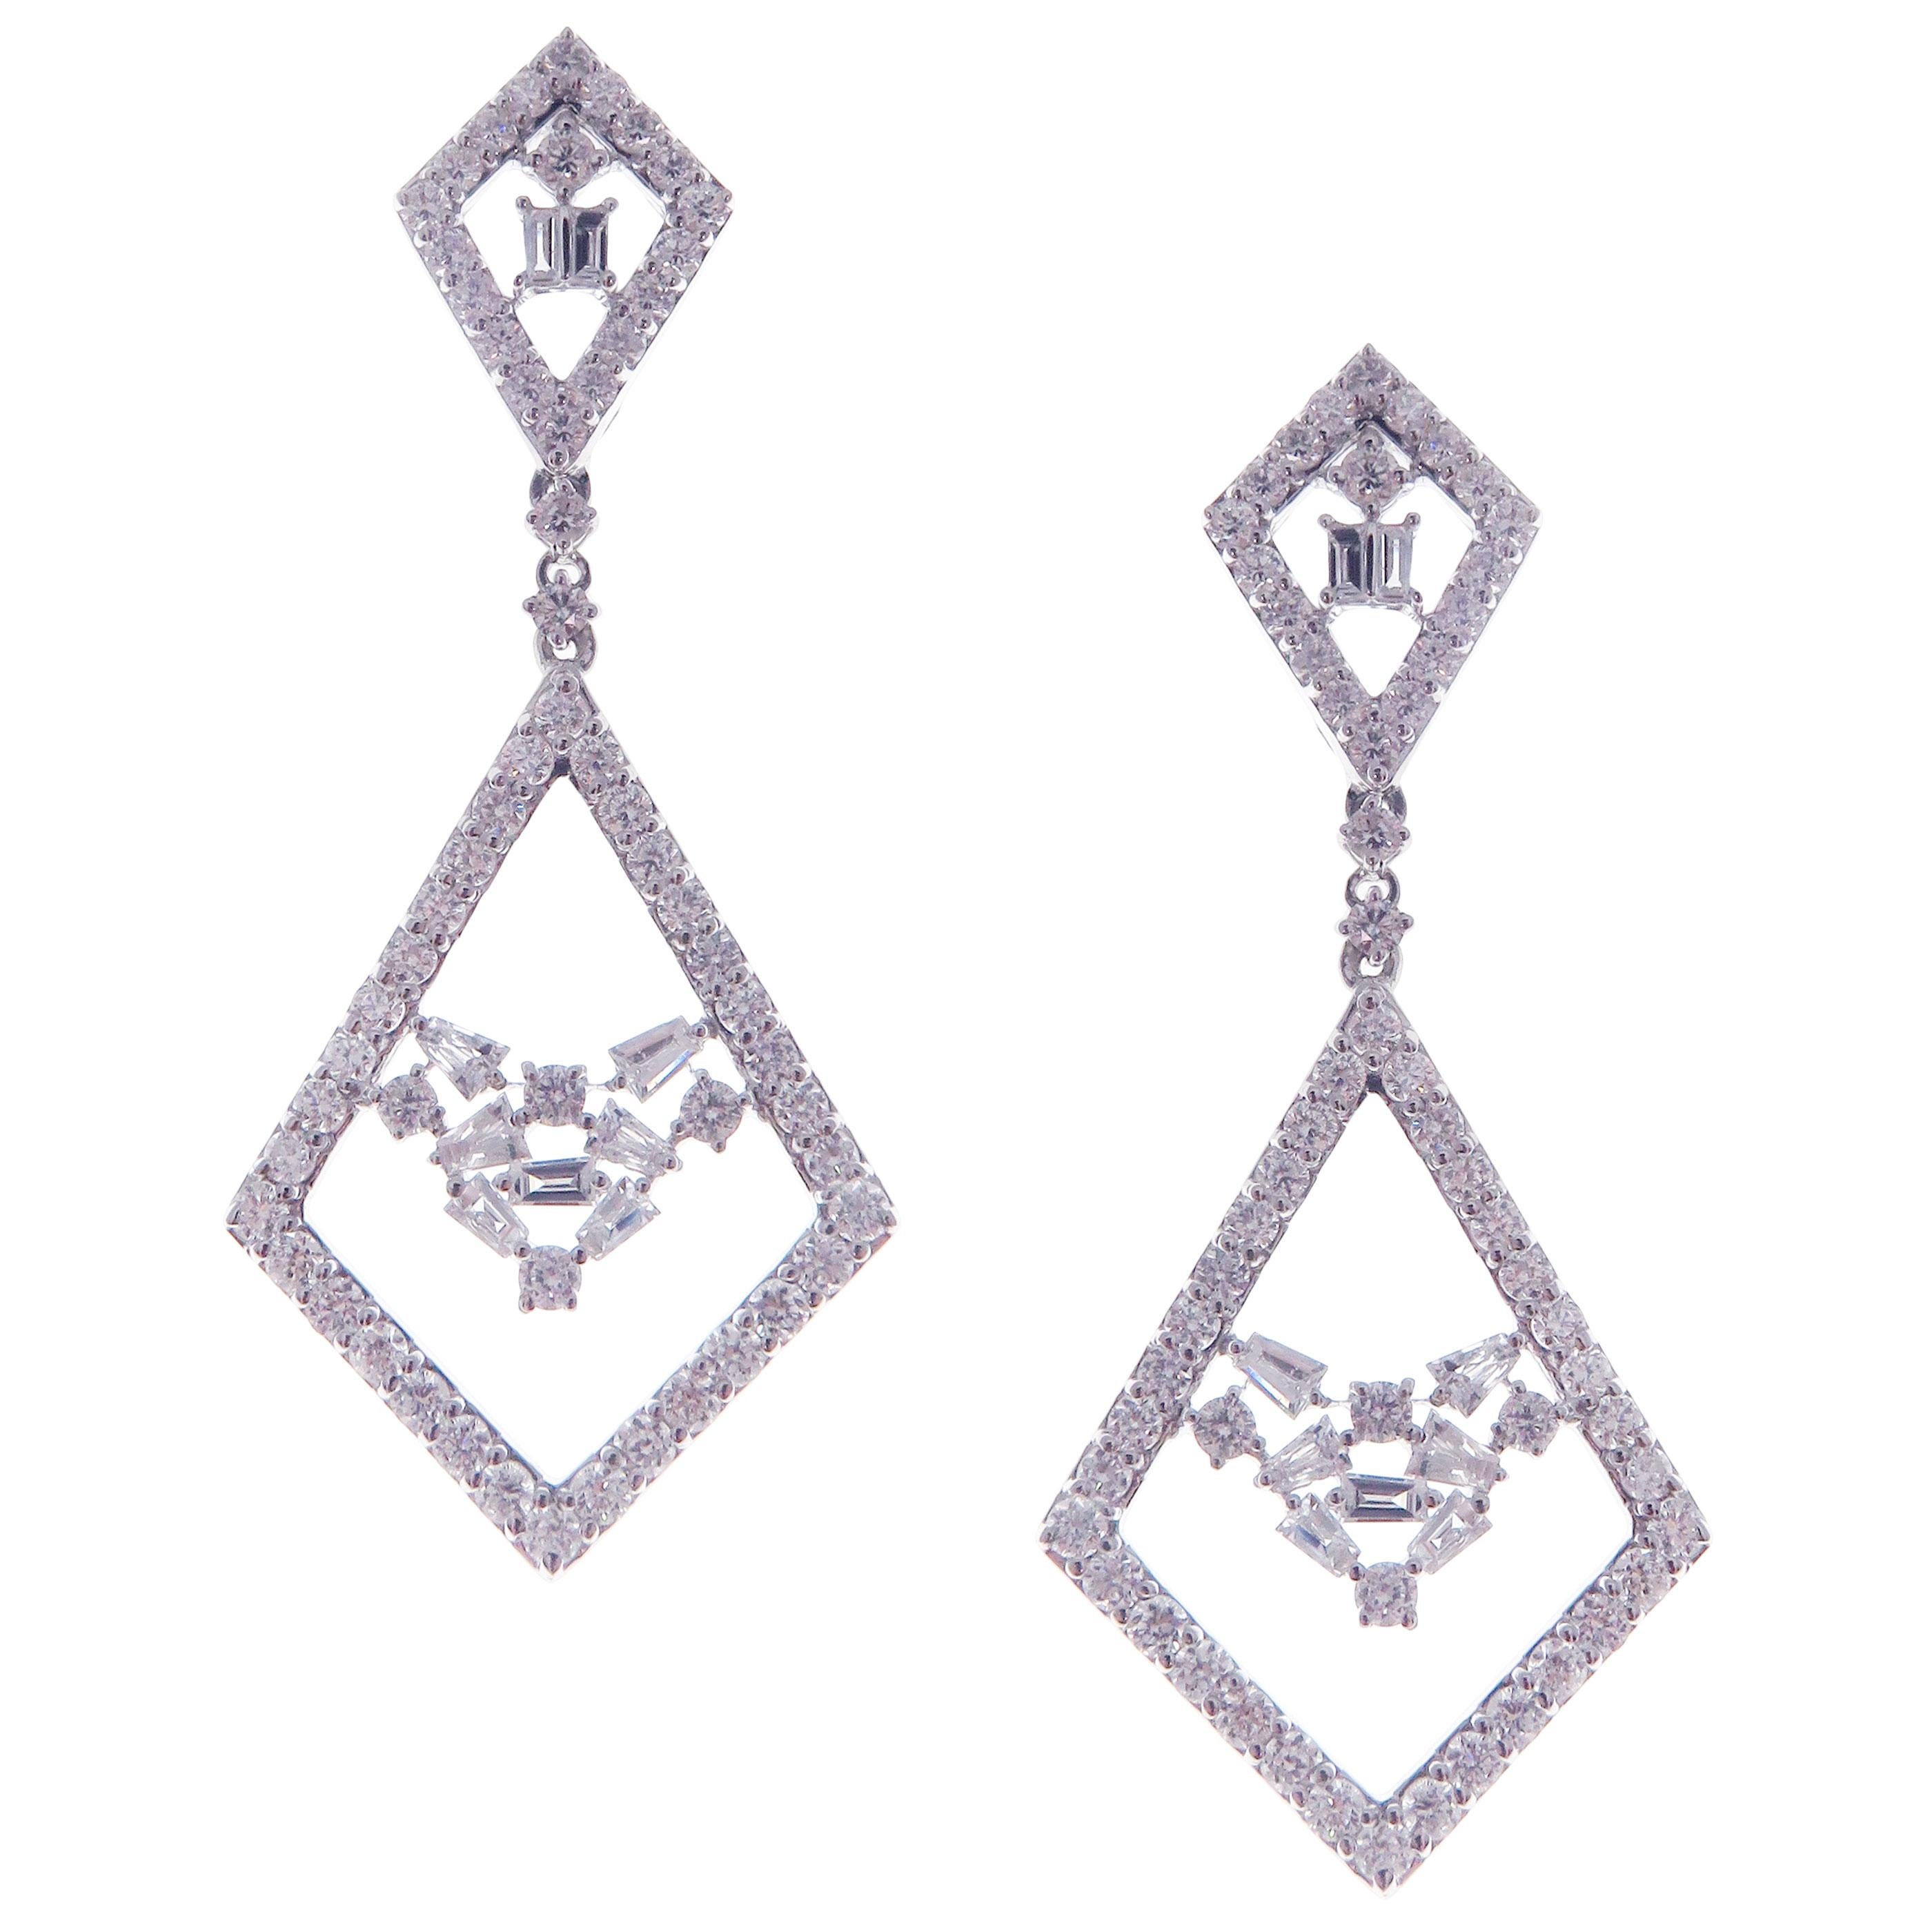 These symmetrical dangling diamond earrings are crafted in 18-karat white gold, featuring 118 round white diamonds totaling of 2.66 carats and 18 baguette white diamonds totaling of 0.62 carats.
Approximate total weight 7.18 grams.
These earrings